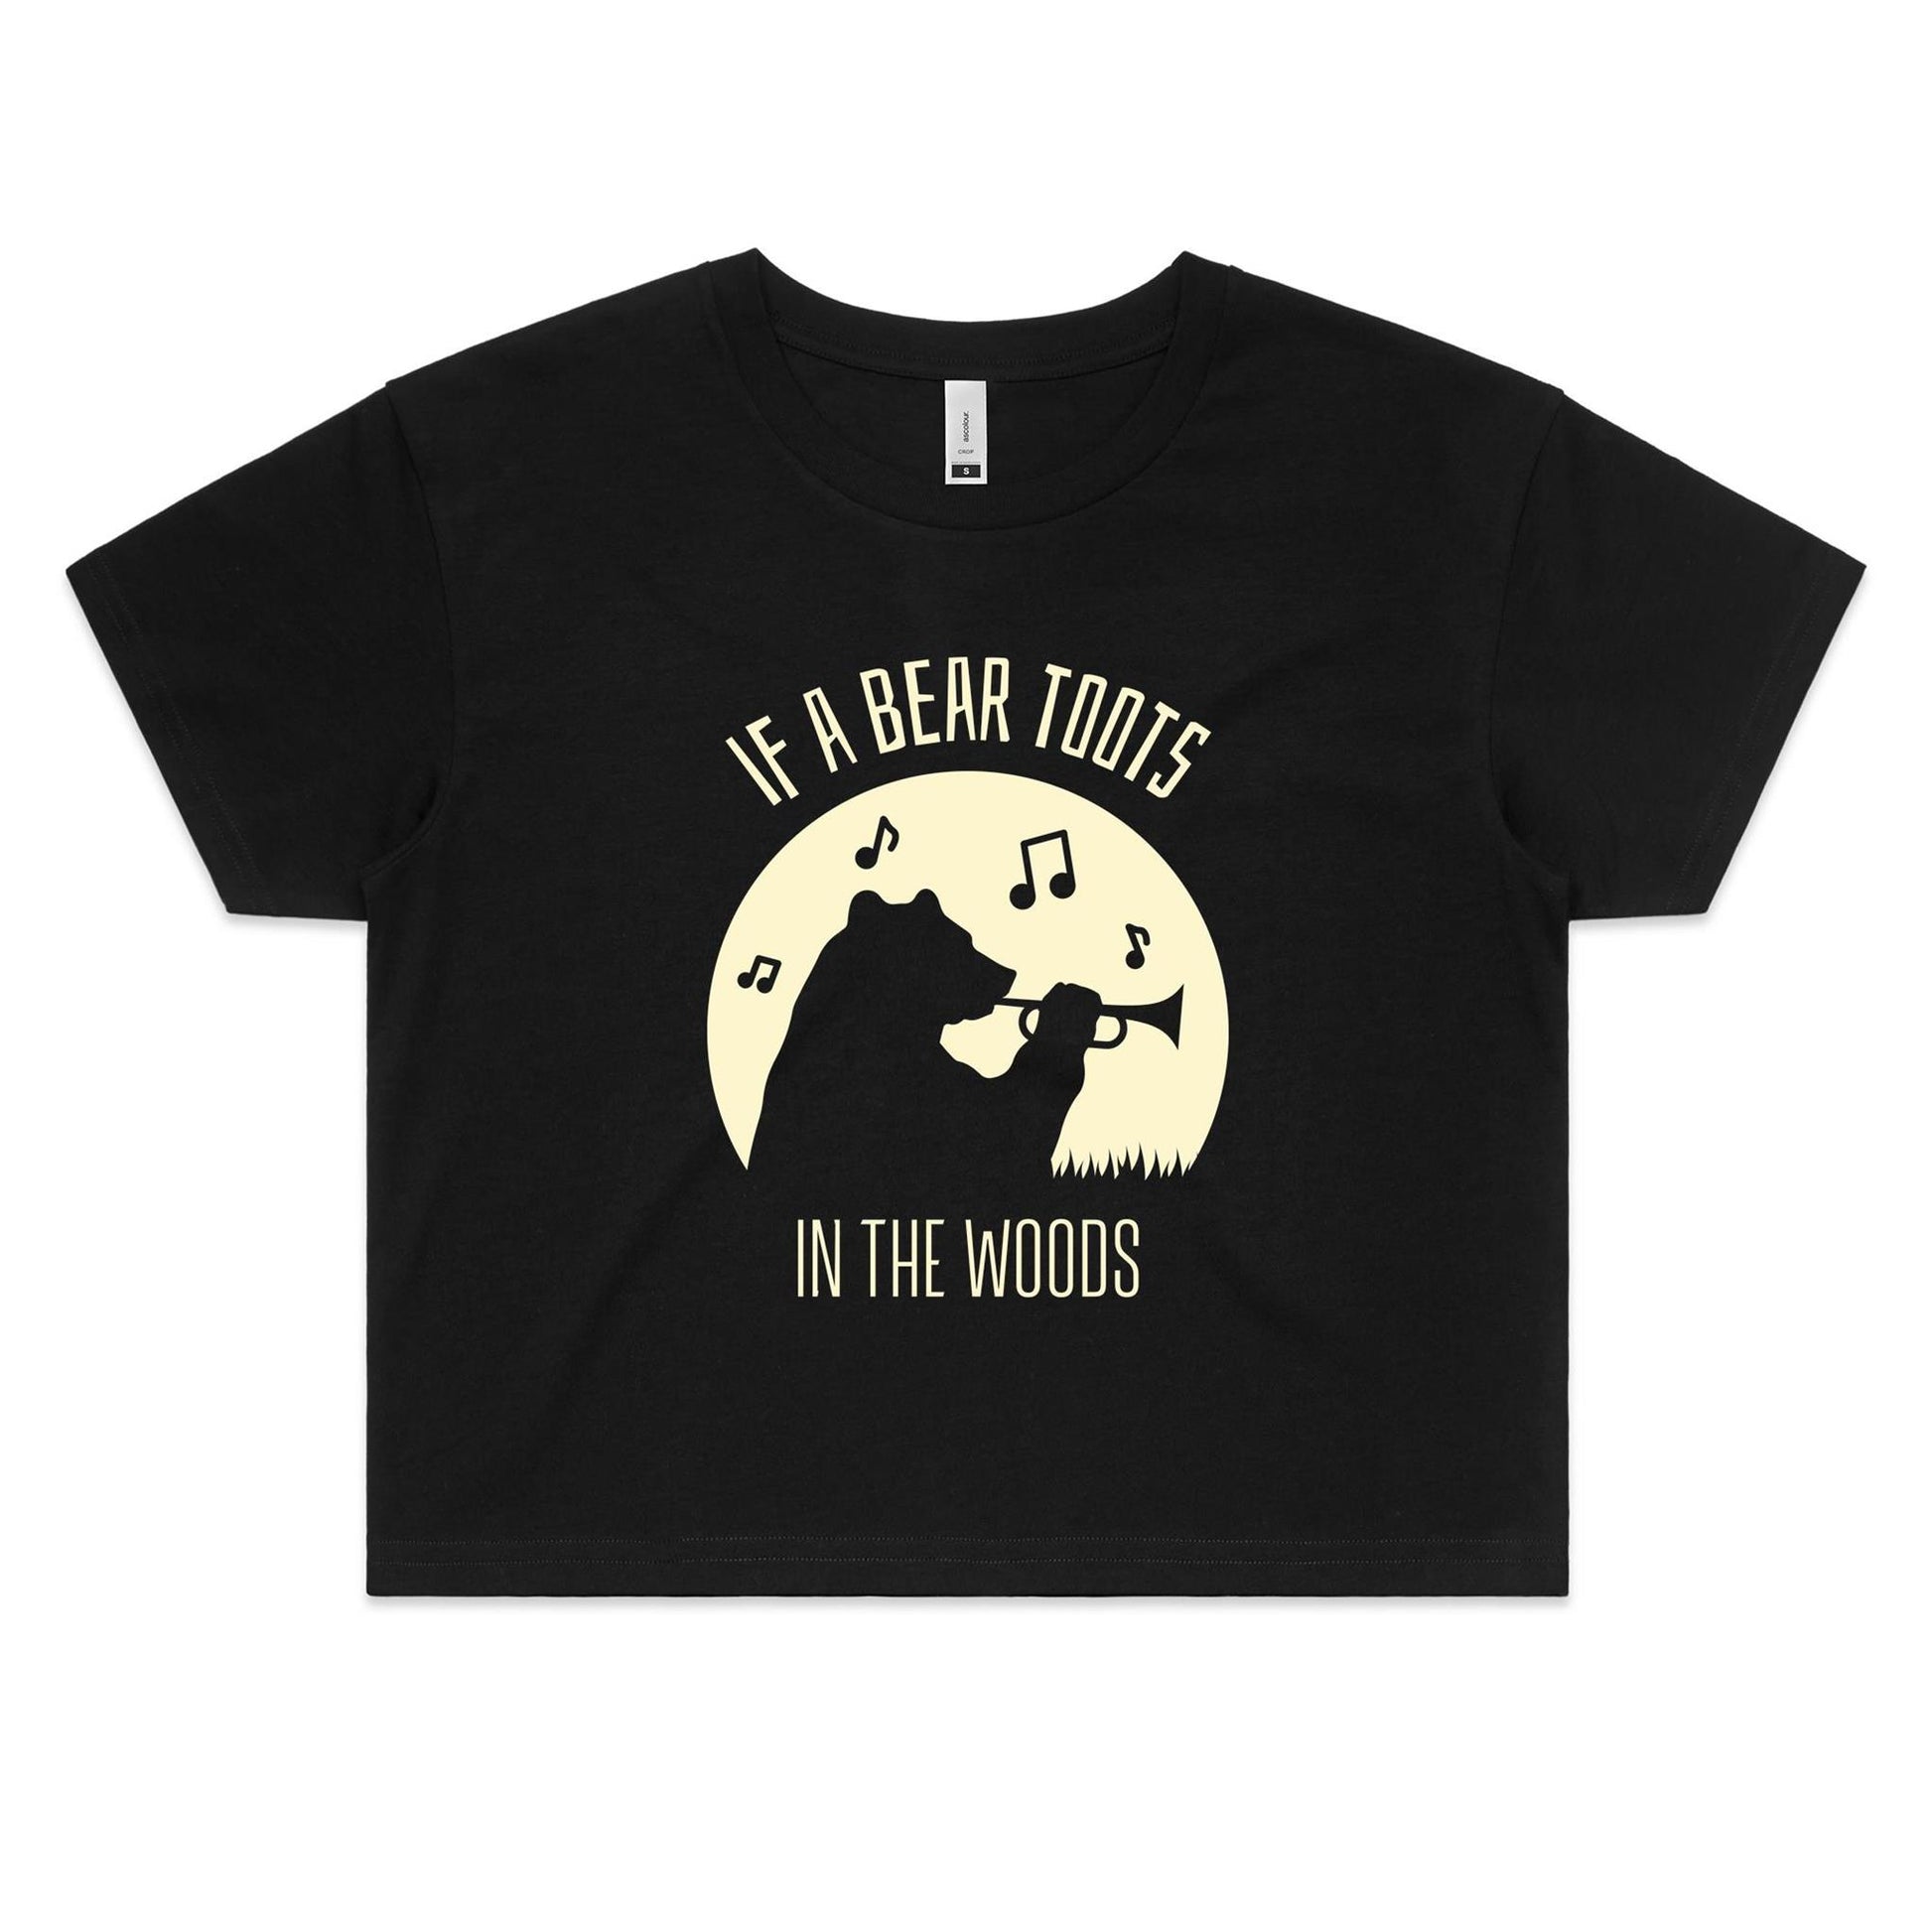 If A Bear Toots In The Woods, Trumpet Player - Women's Crop Tee Black Womens Crop Top animal Music